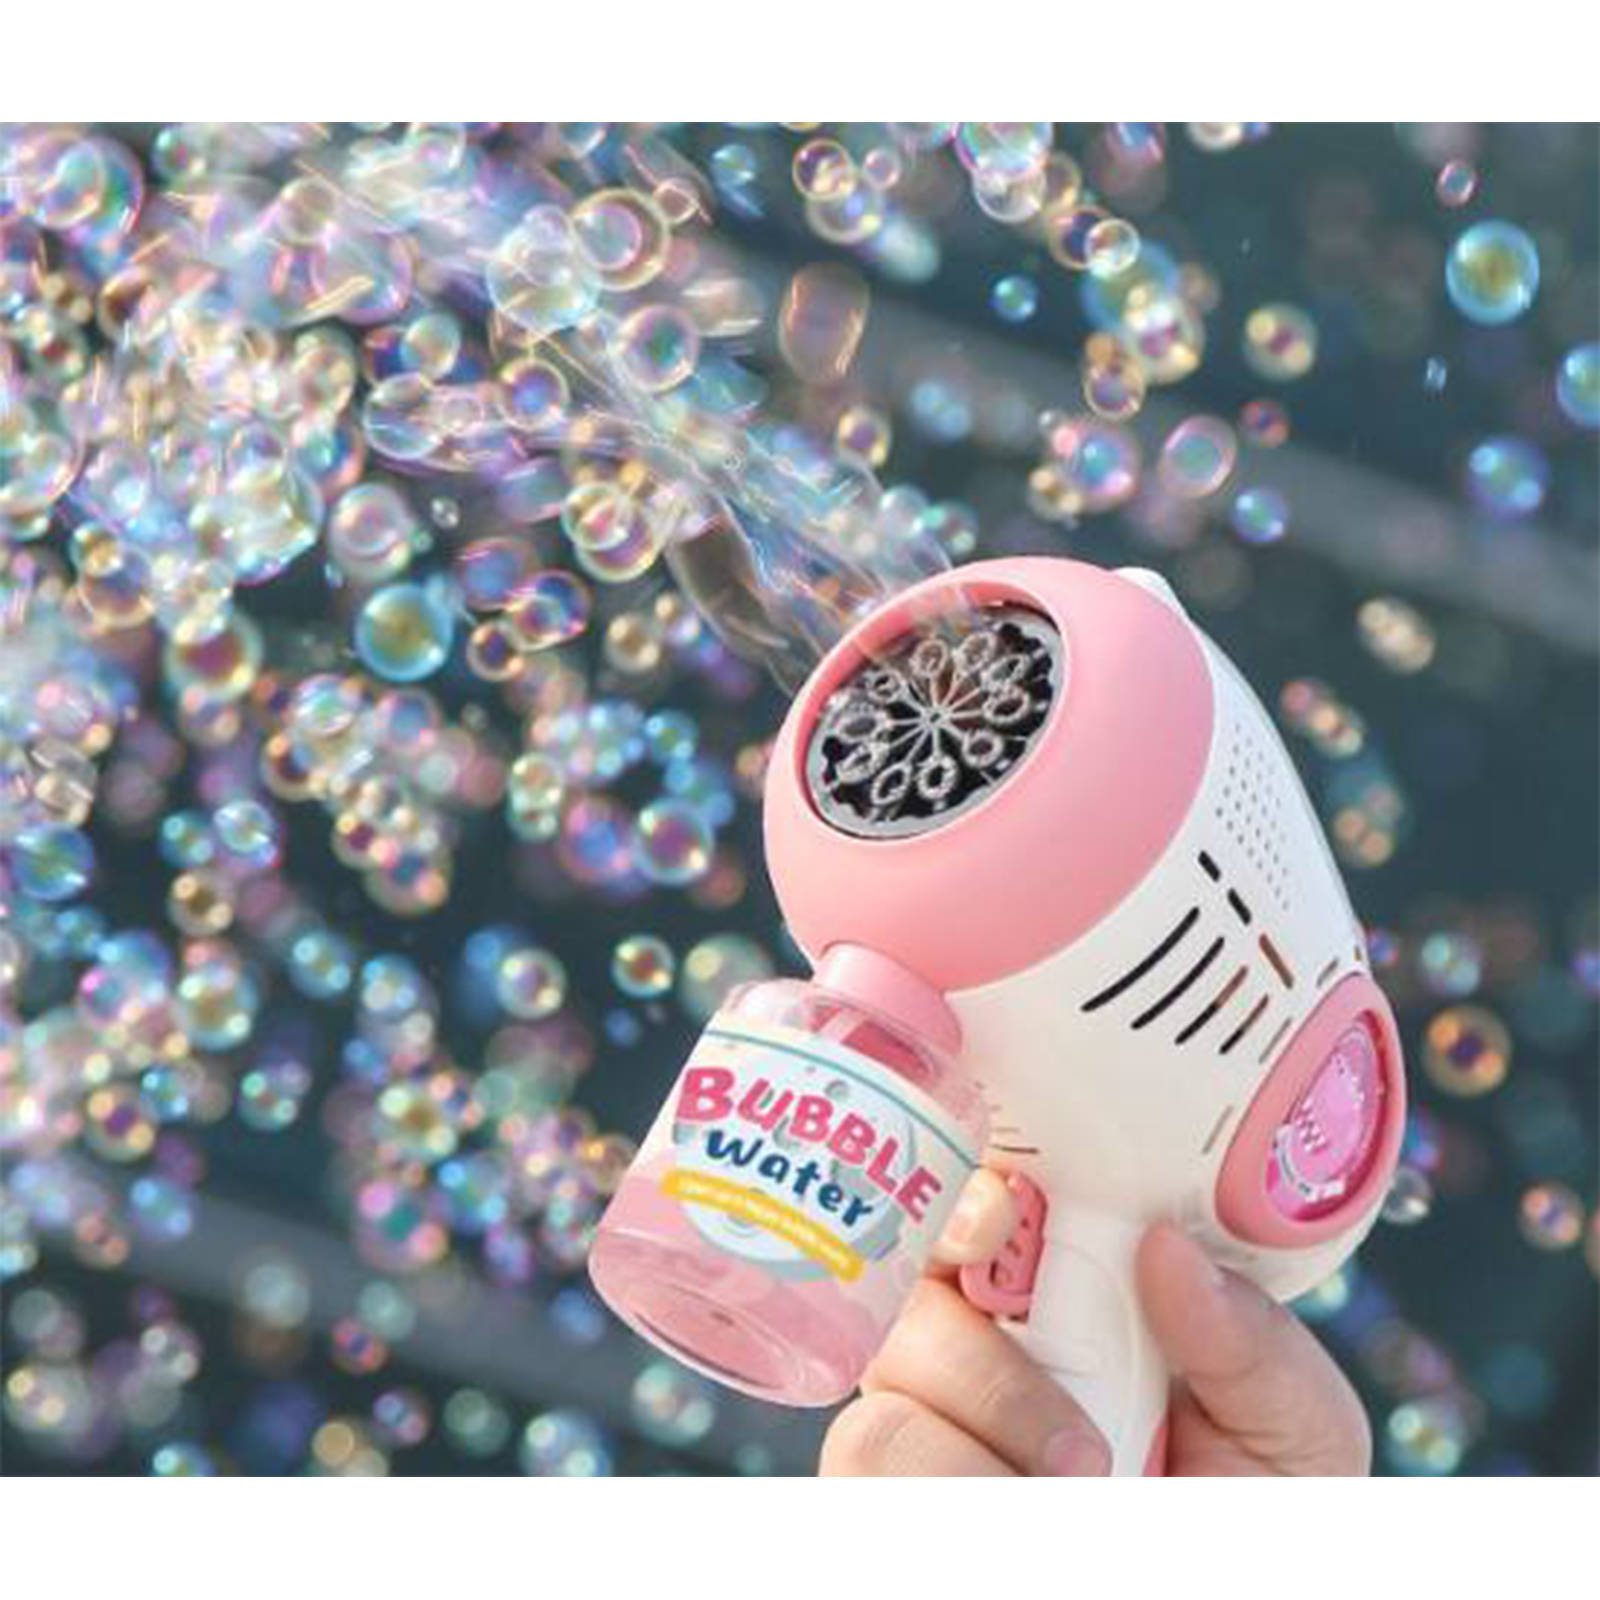 Boys and Girls Hold Automatic Watertight Bubble Guns Girls' Hearts Price